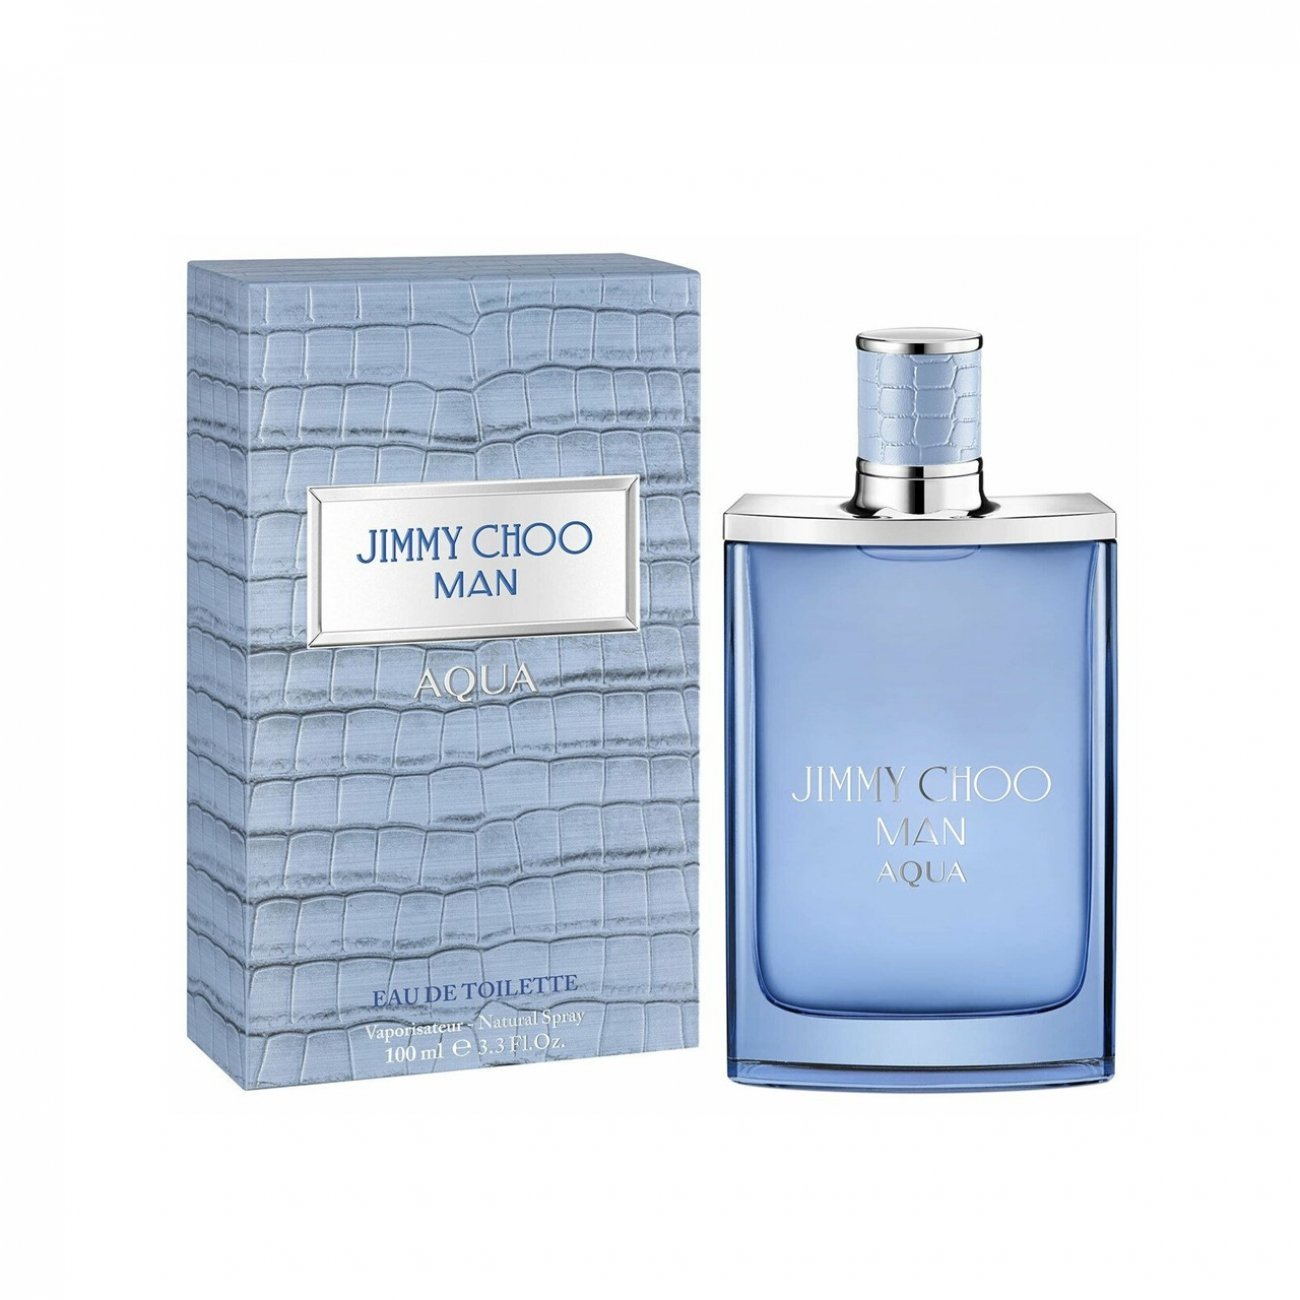 Cologne Perfume For Men,Refreshing Lasting Woody/Ocean Perfume,Fragrance  For Any Occasions,Unleash Your Masculinity,An Ideal Gift,1.7Fl.Oz/50ml